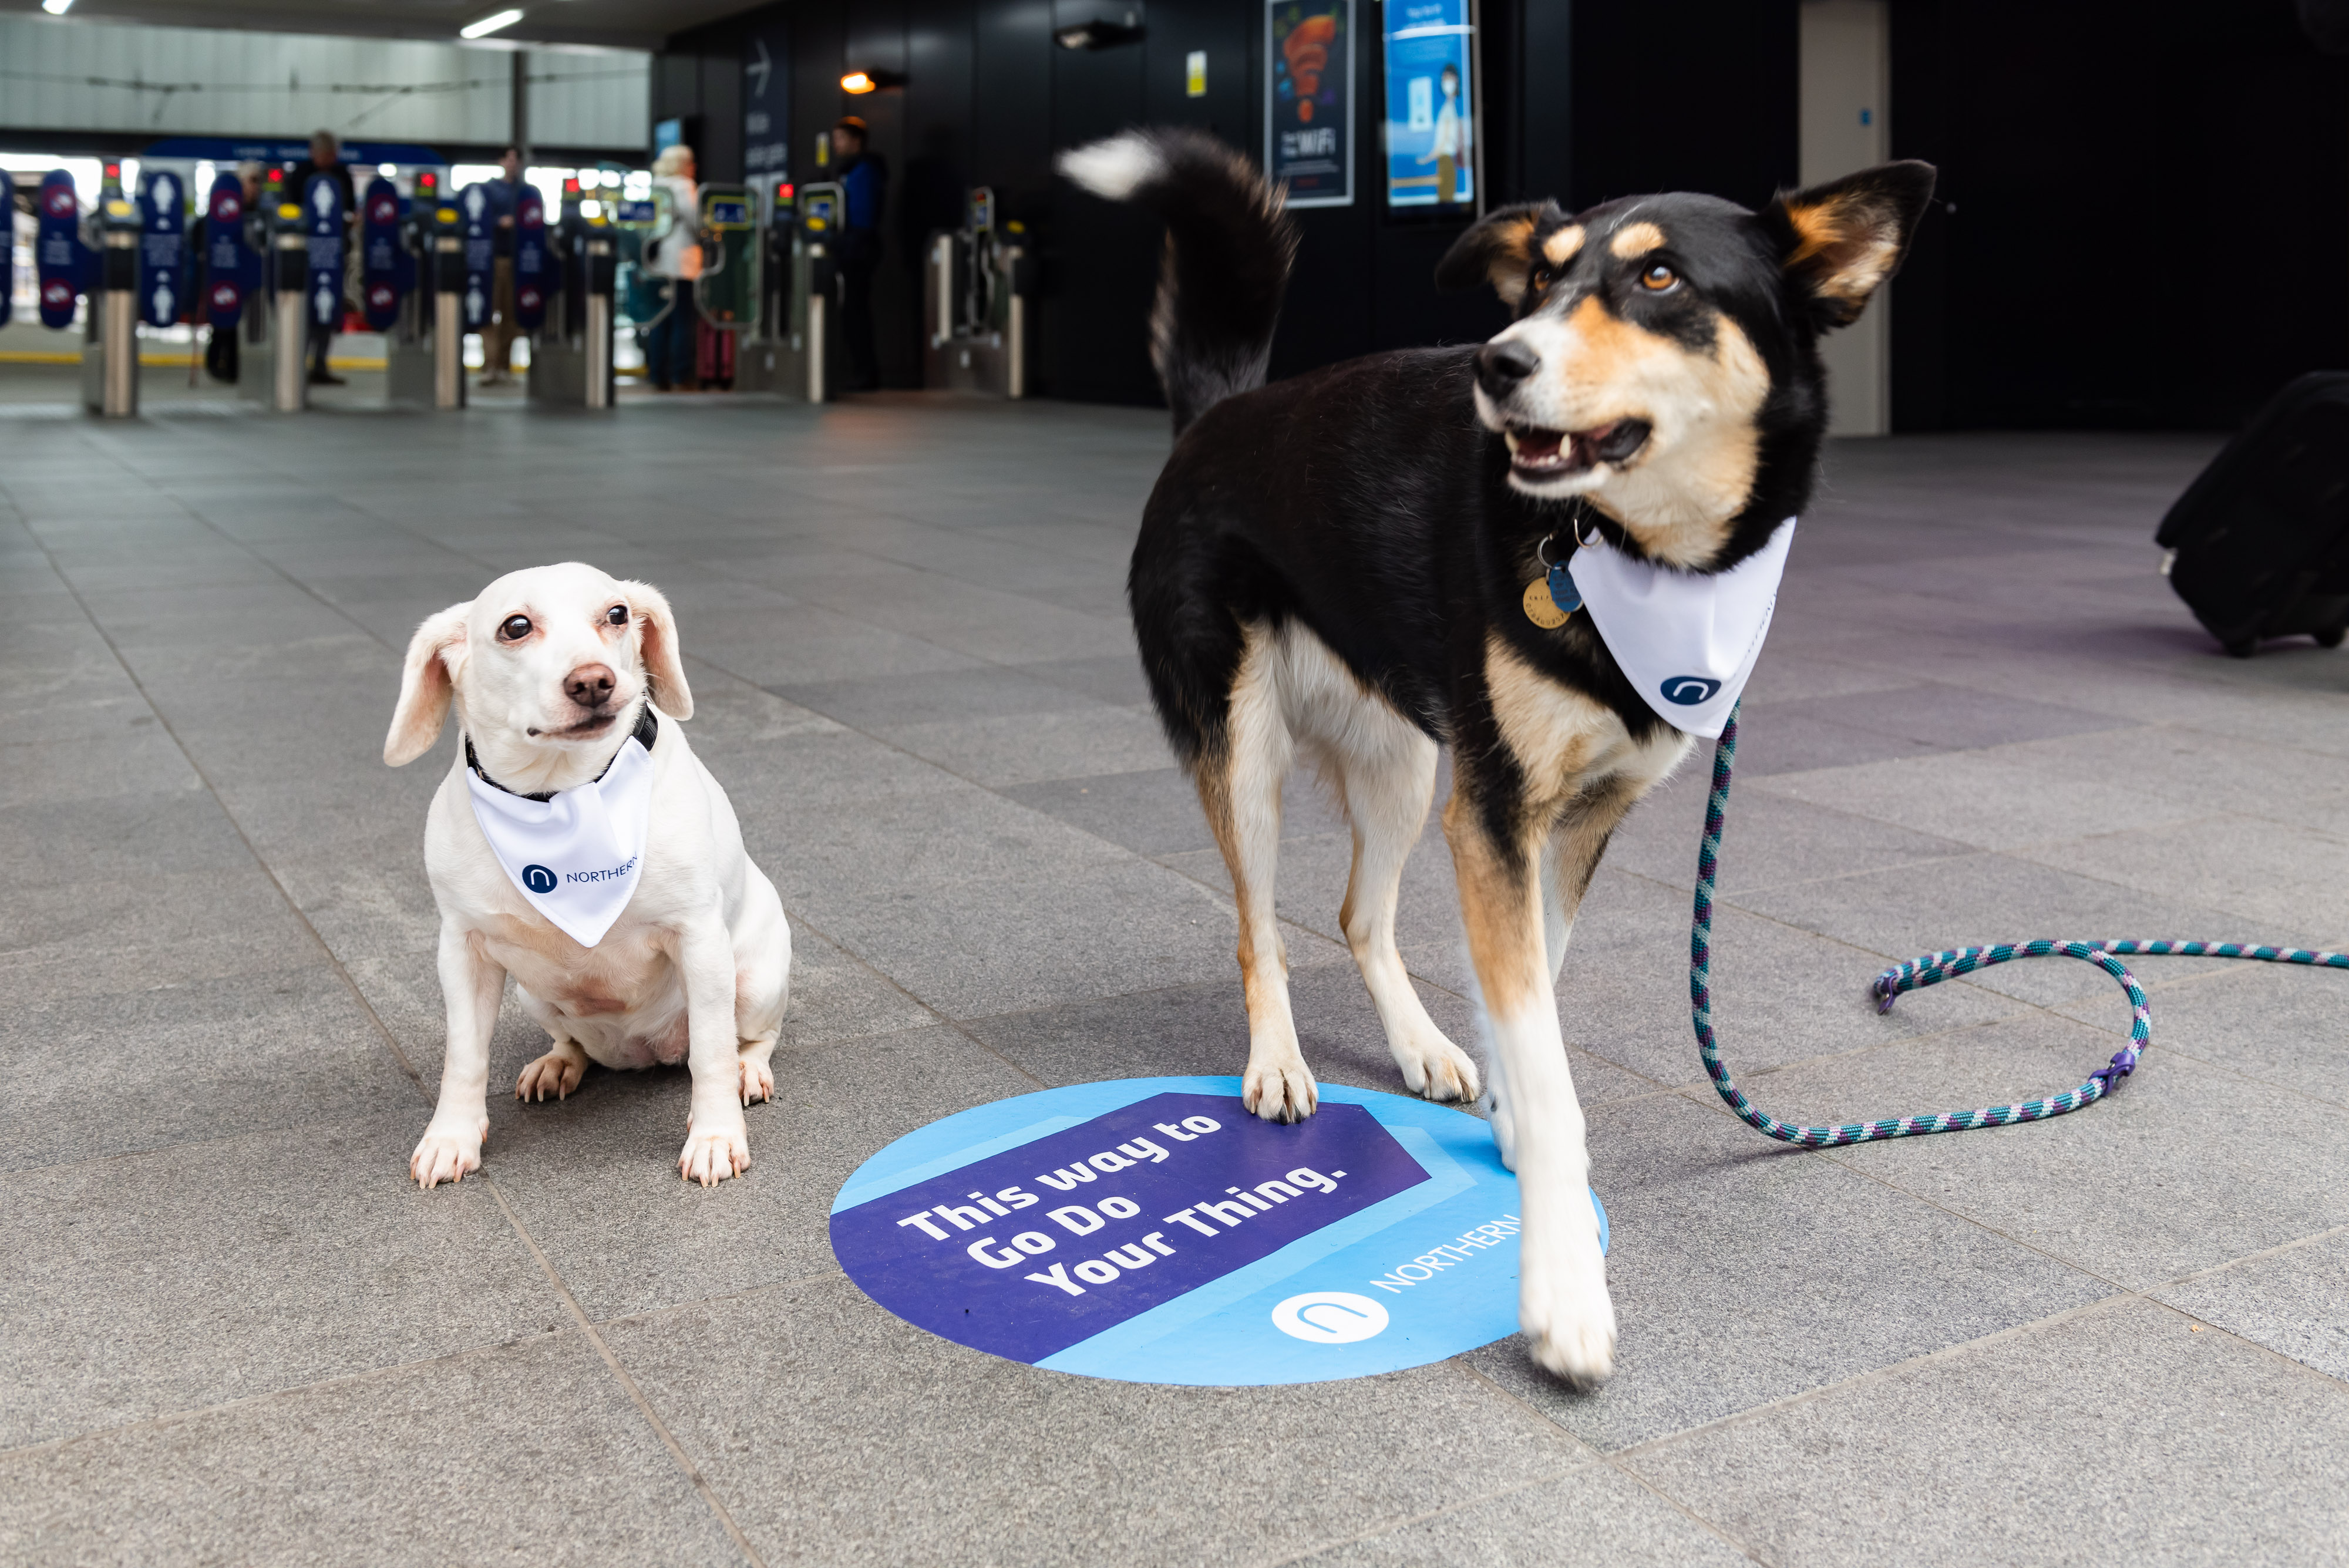 Image of two dogs in a train station